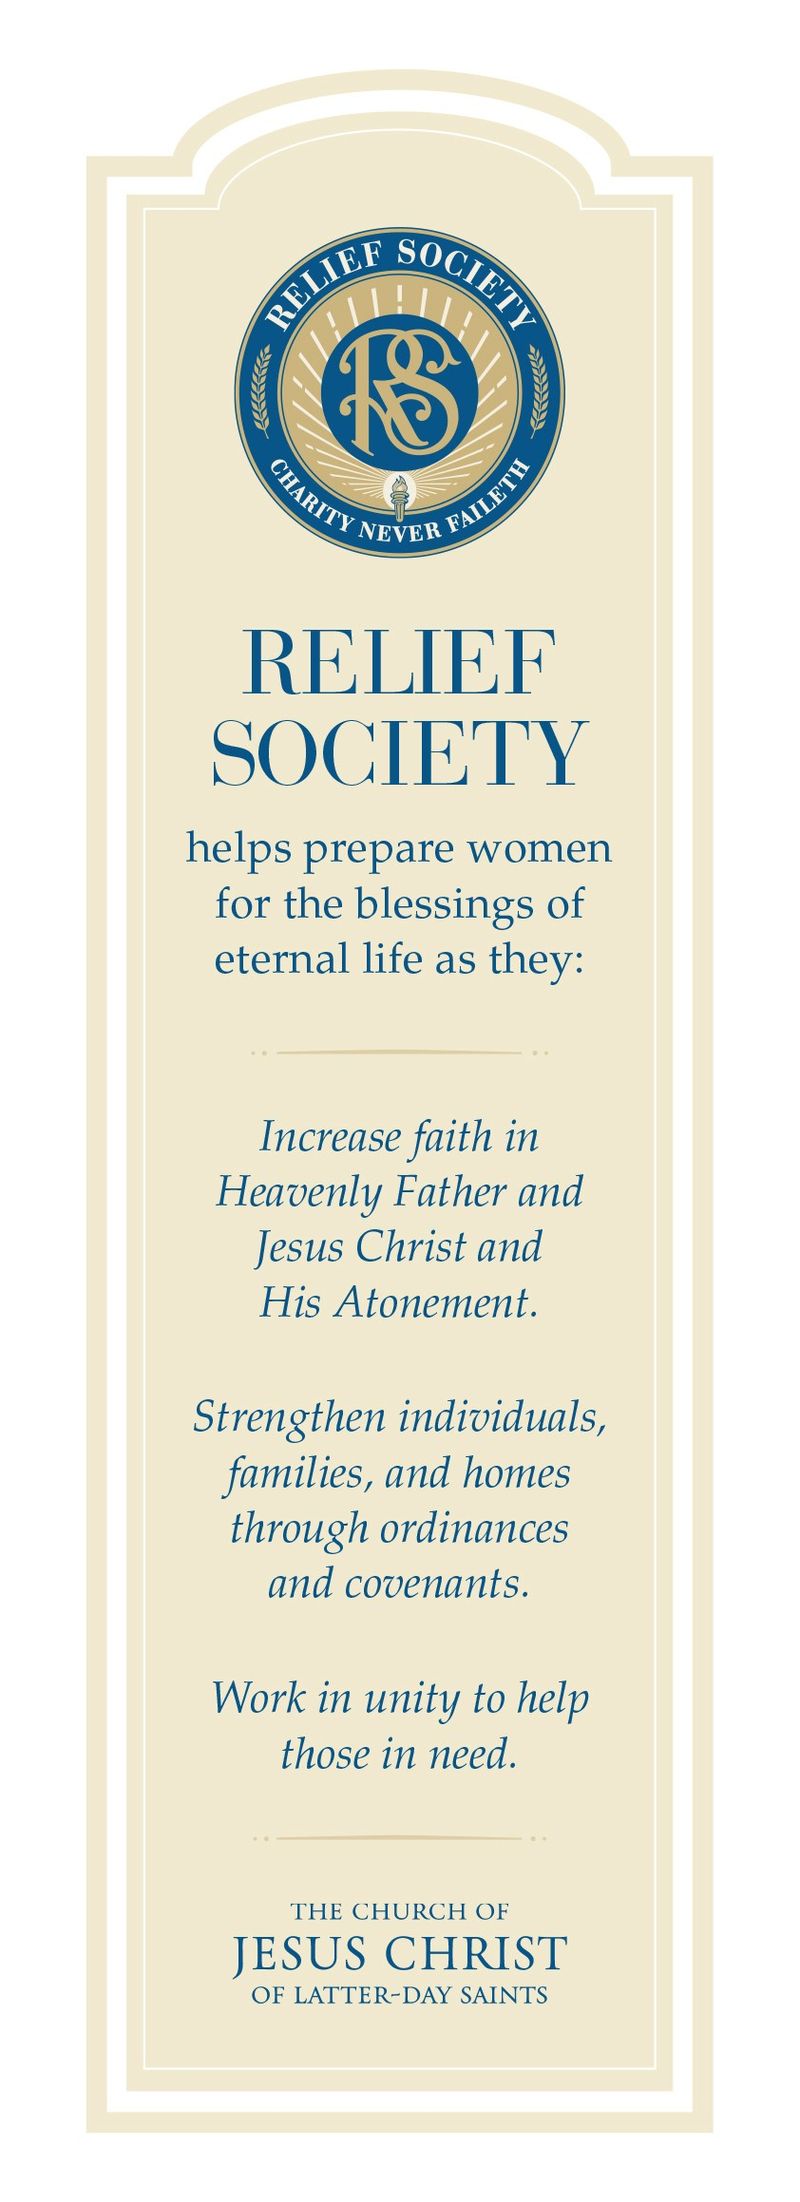 “Relief Society helps prepare women for the blessings of eternal life as they: Increase faith in Heavenly Father and Jesus Christ and His Atonement. Strengthen individuals, families, and homes through ordinances and covenants. Work in unity to help those in need.”